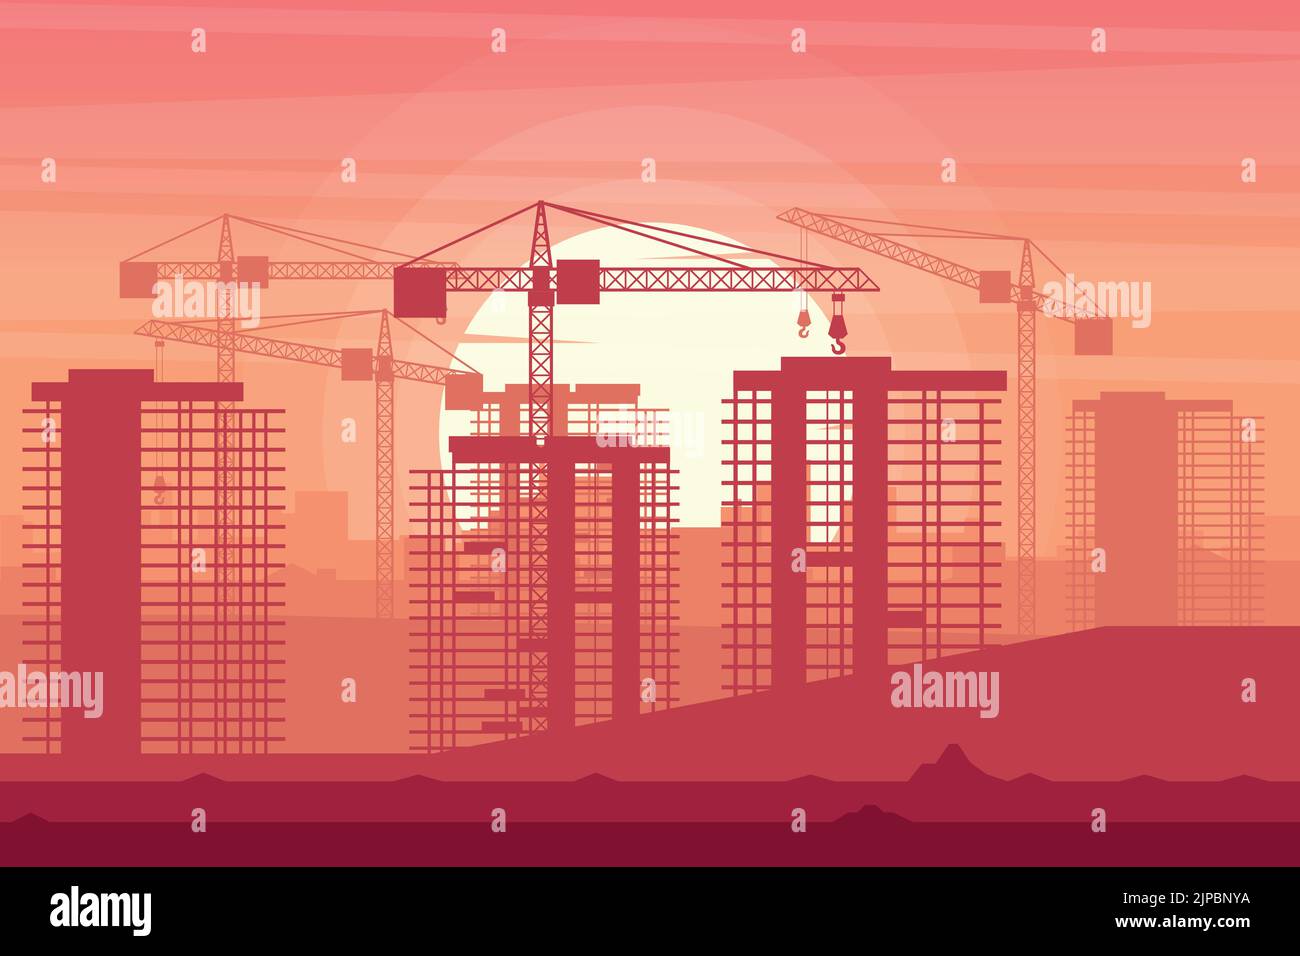 Background landscape of a city under construction with cranes in a sunset Stock Vector